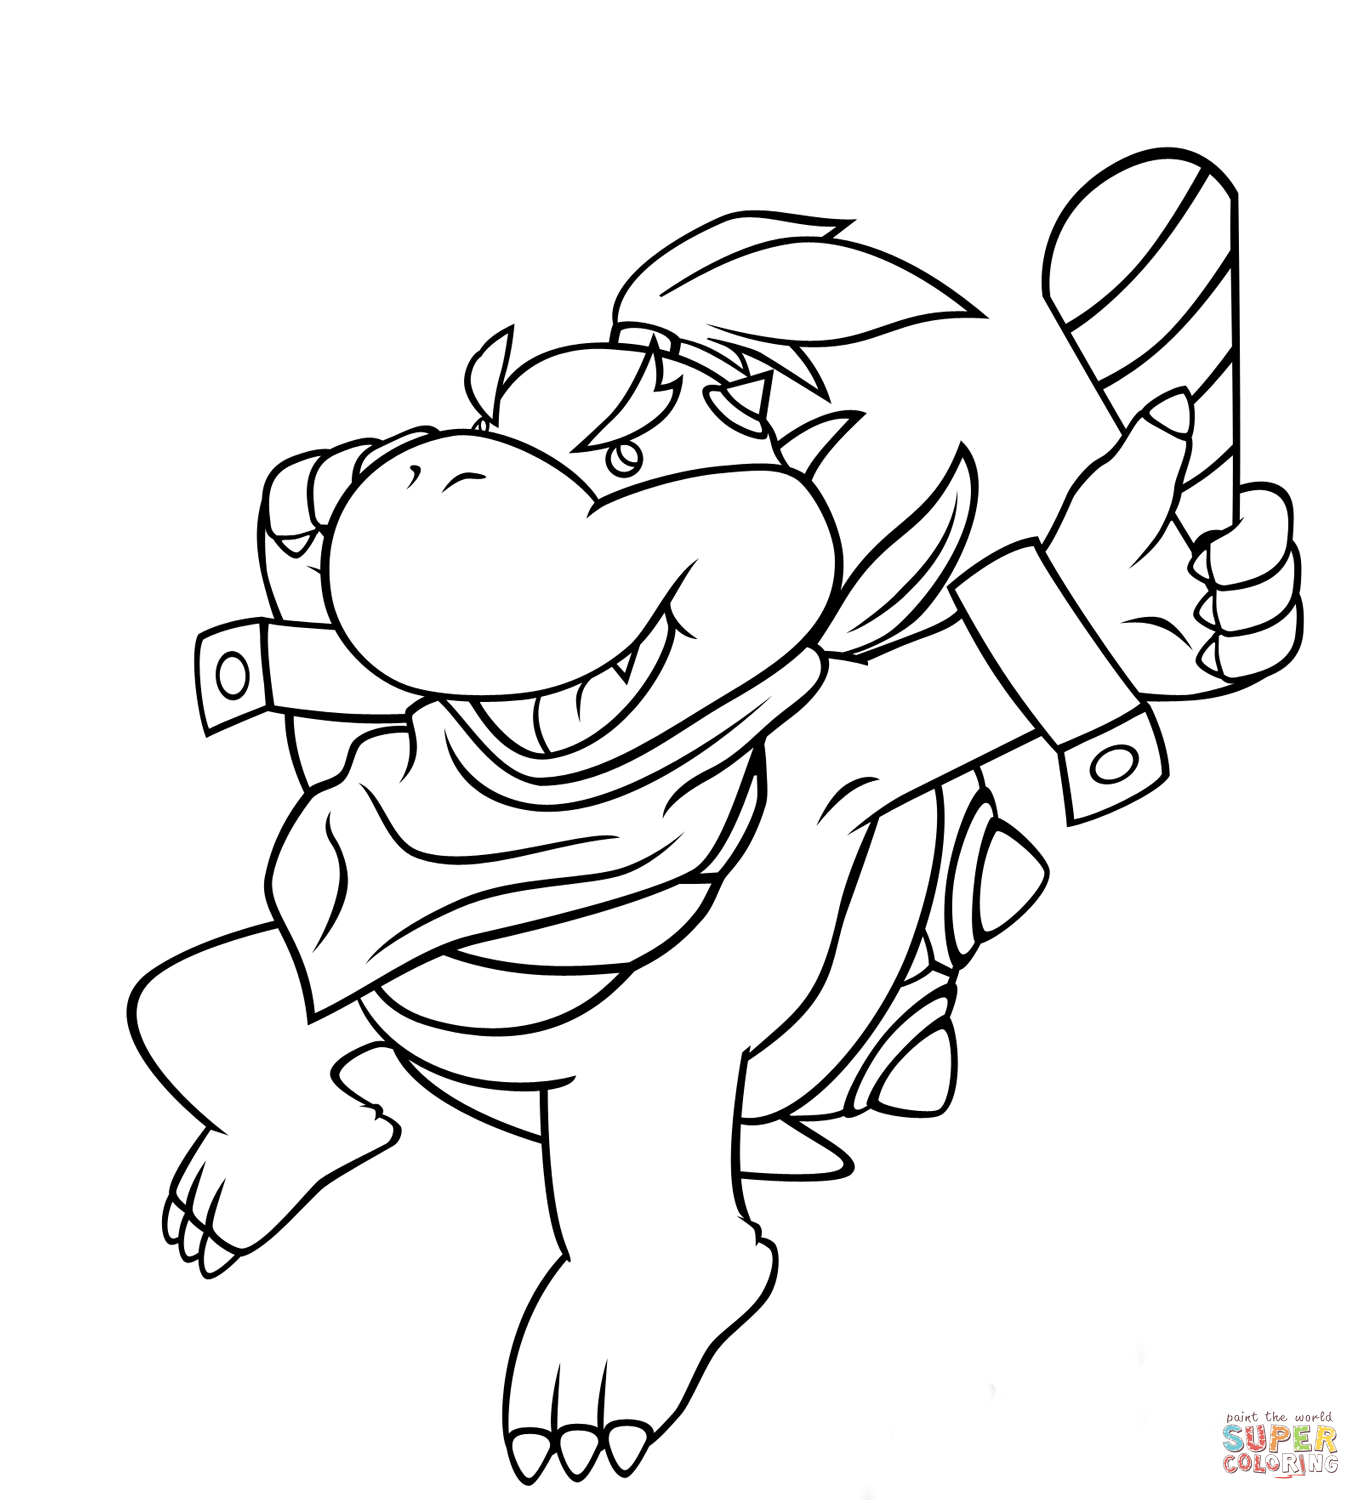 Bowser Jr. coloring page | Free Printable Coloring Pages